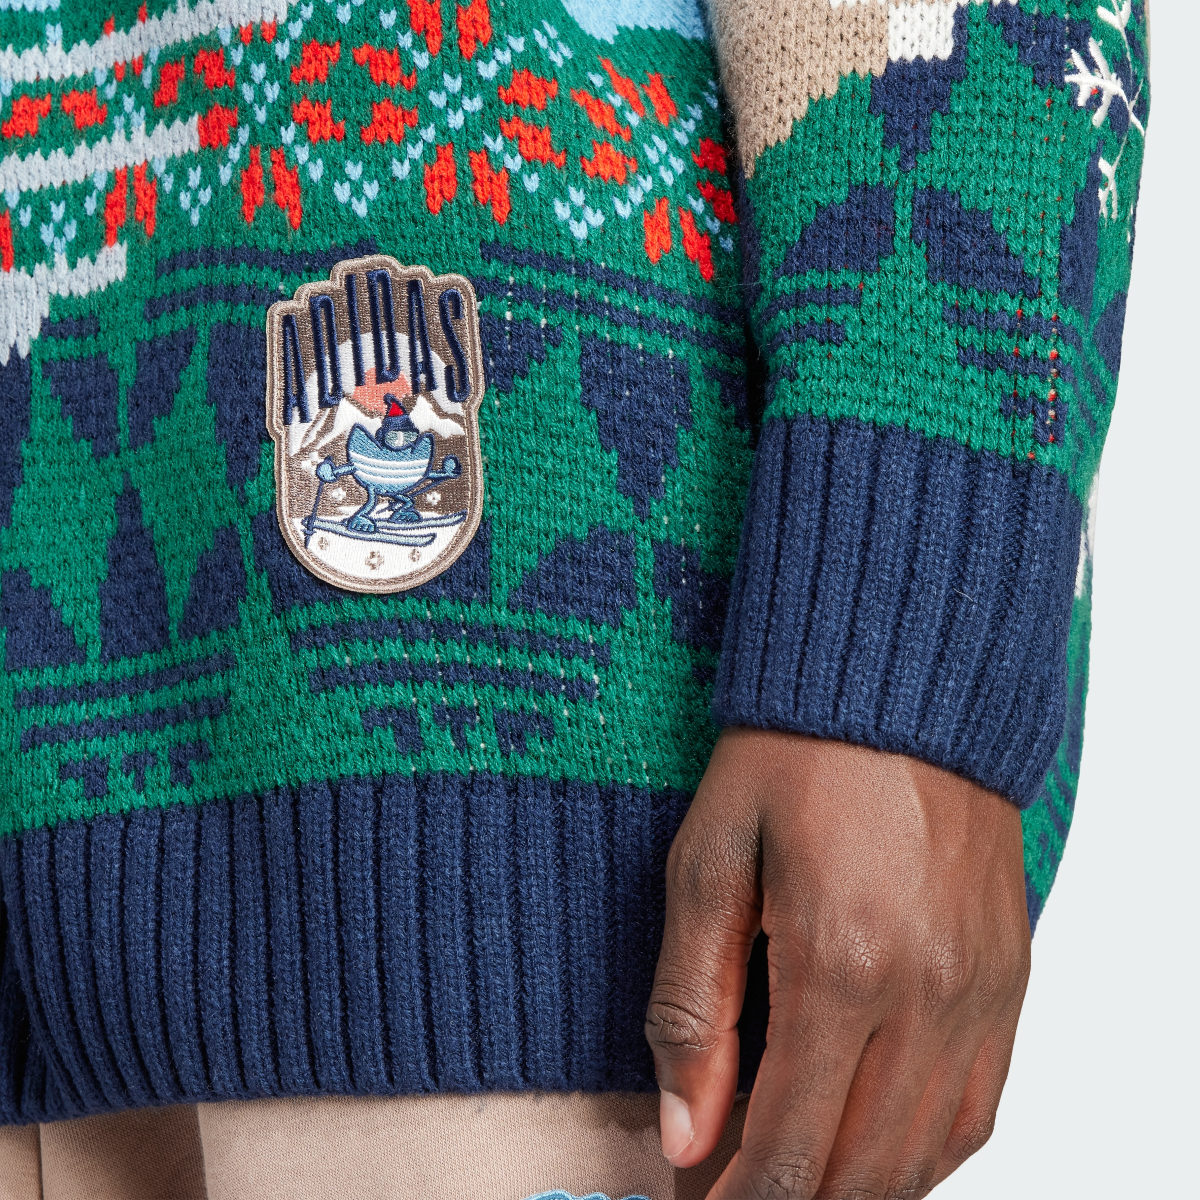 Adidas Holiday Sweater (Gender Neutral). 6